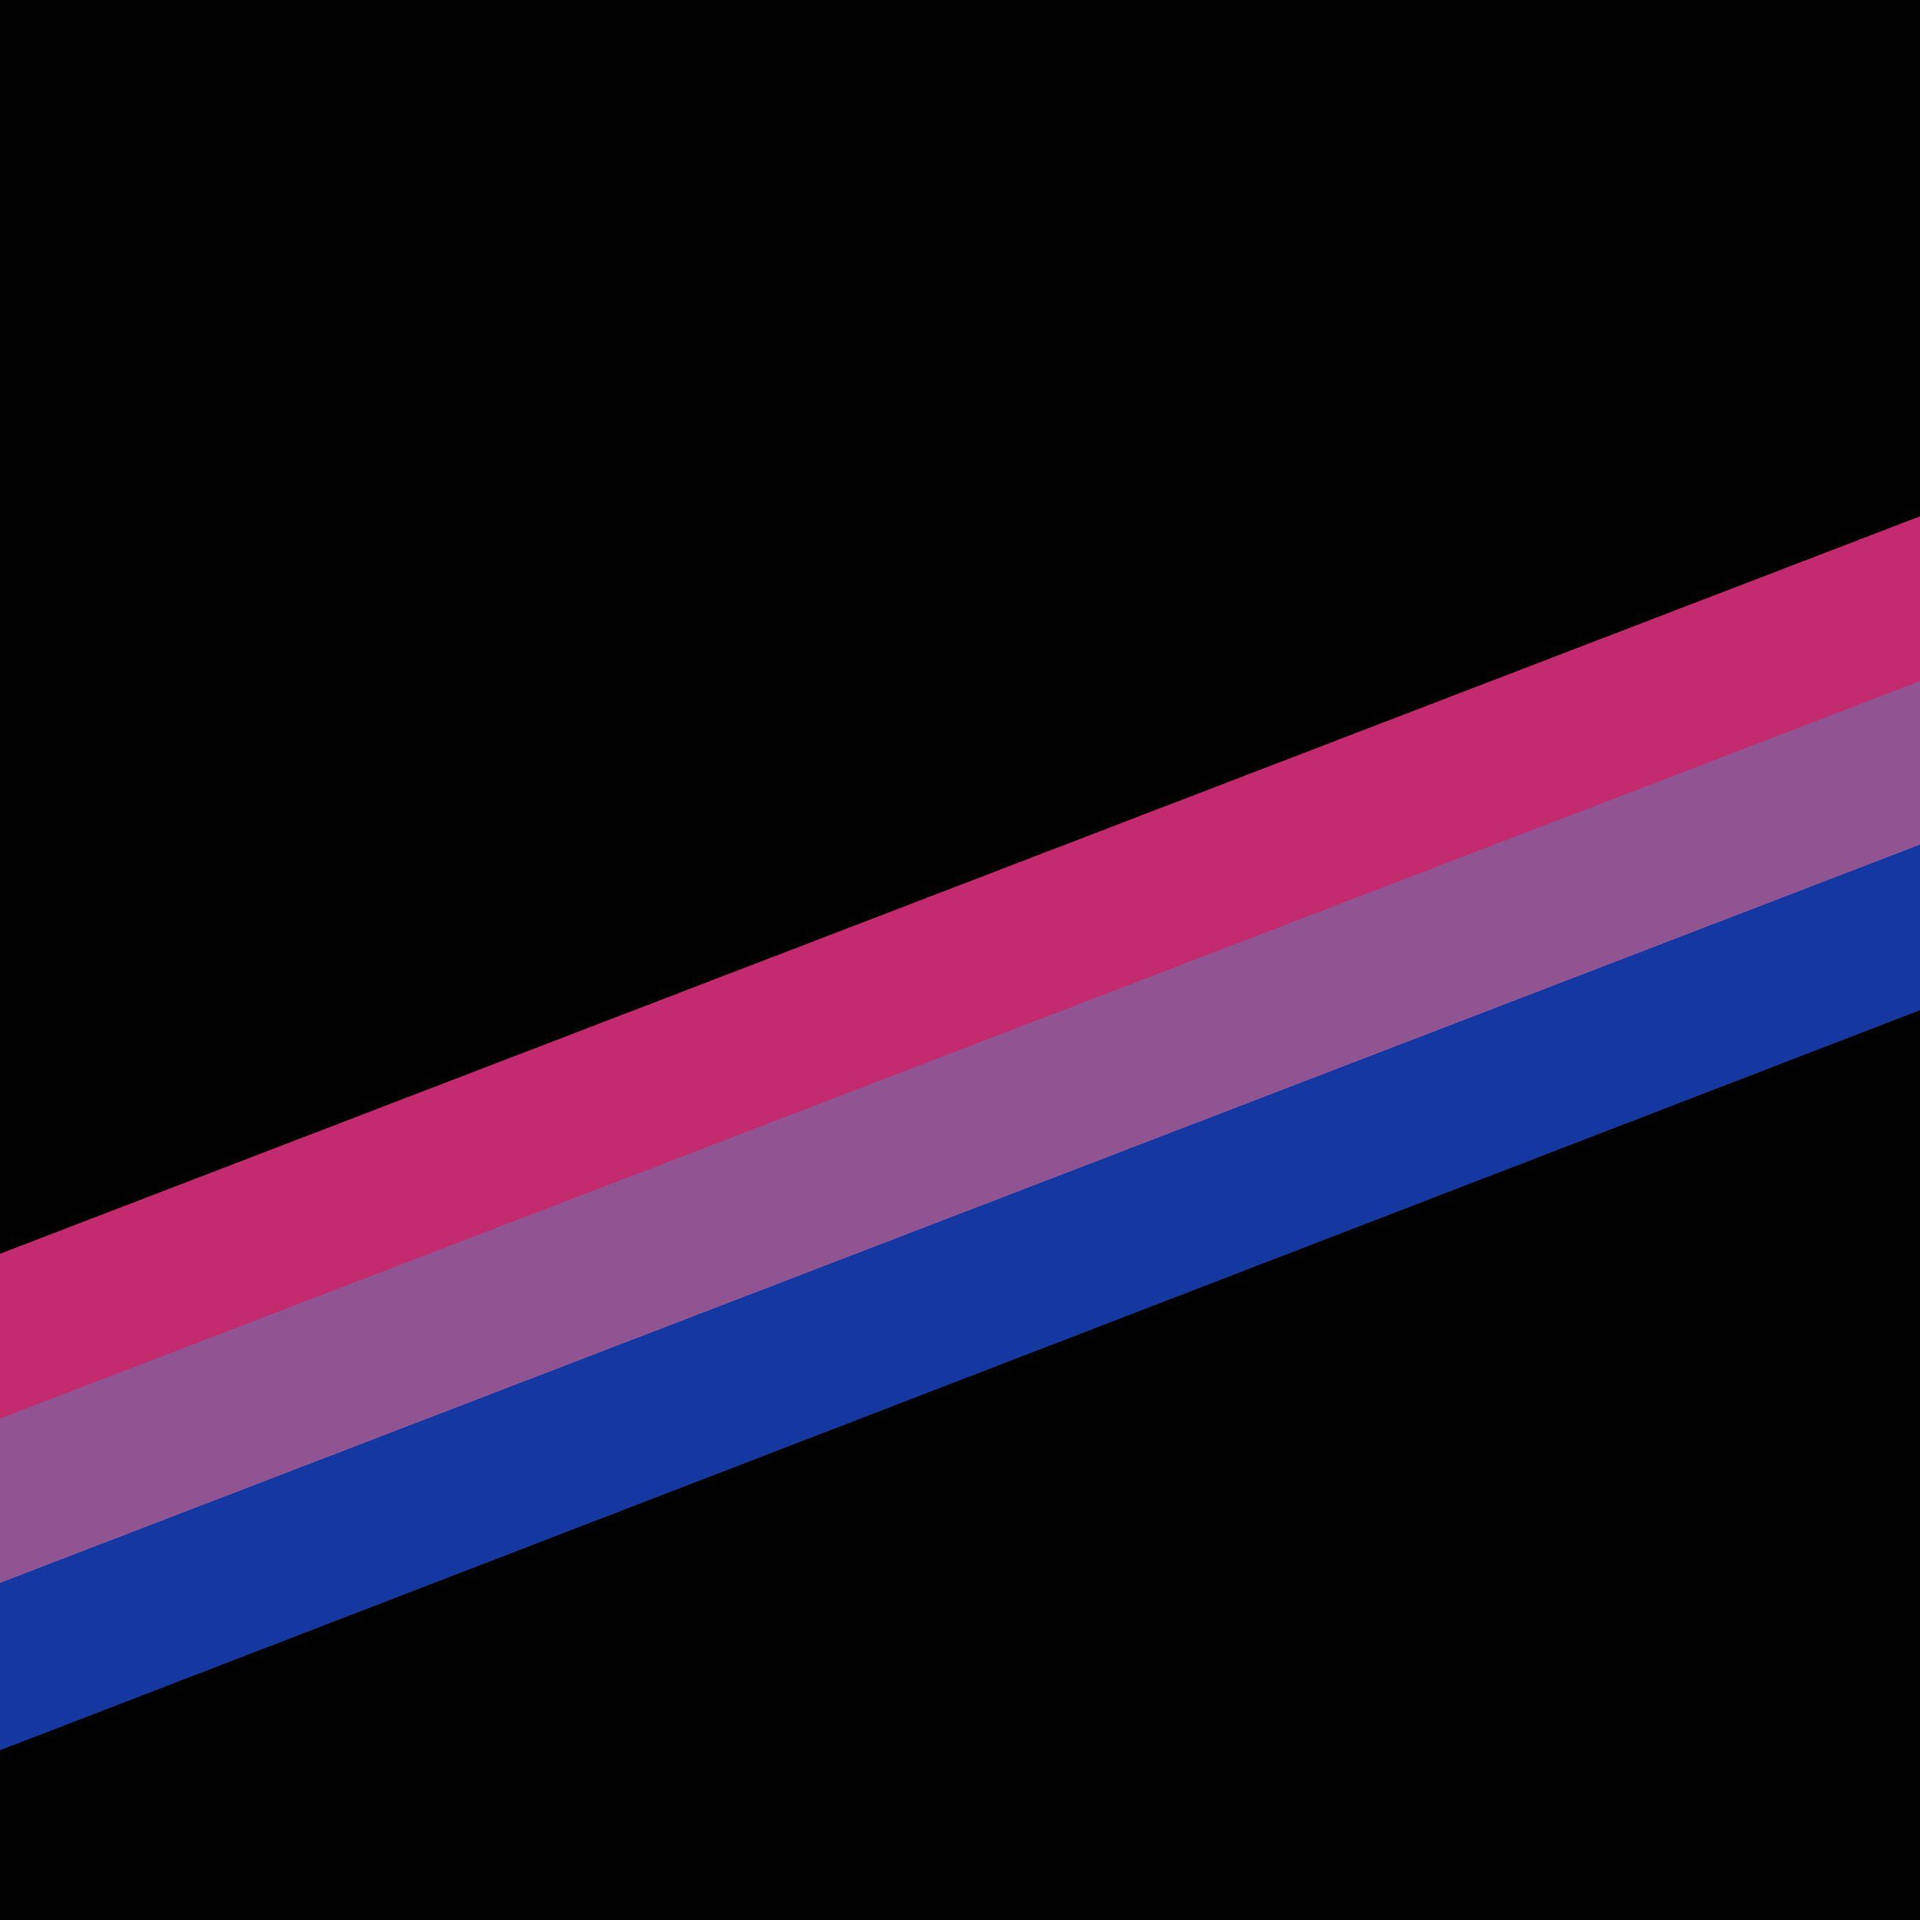 2706X2706 Bisexual Flag Wallpaper and Background